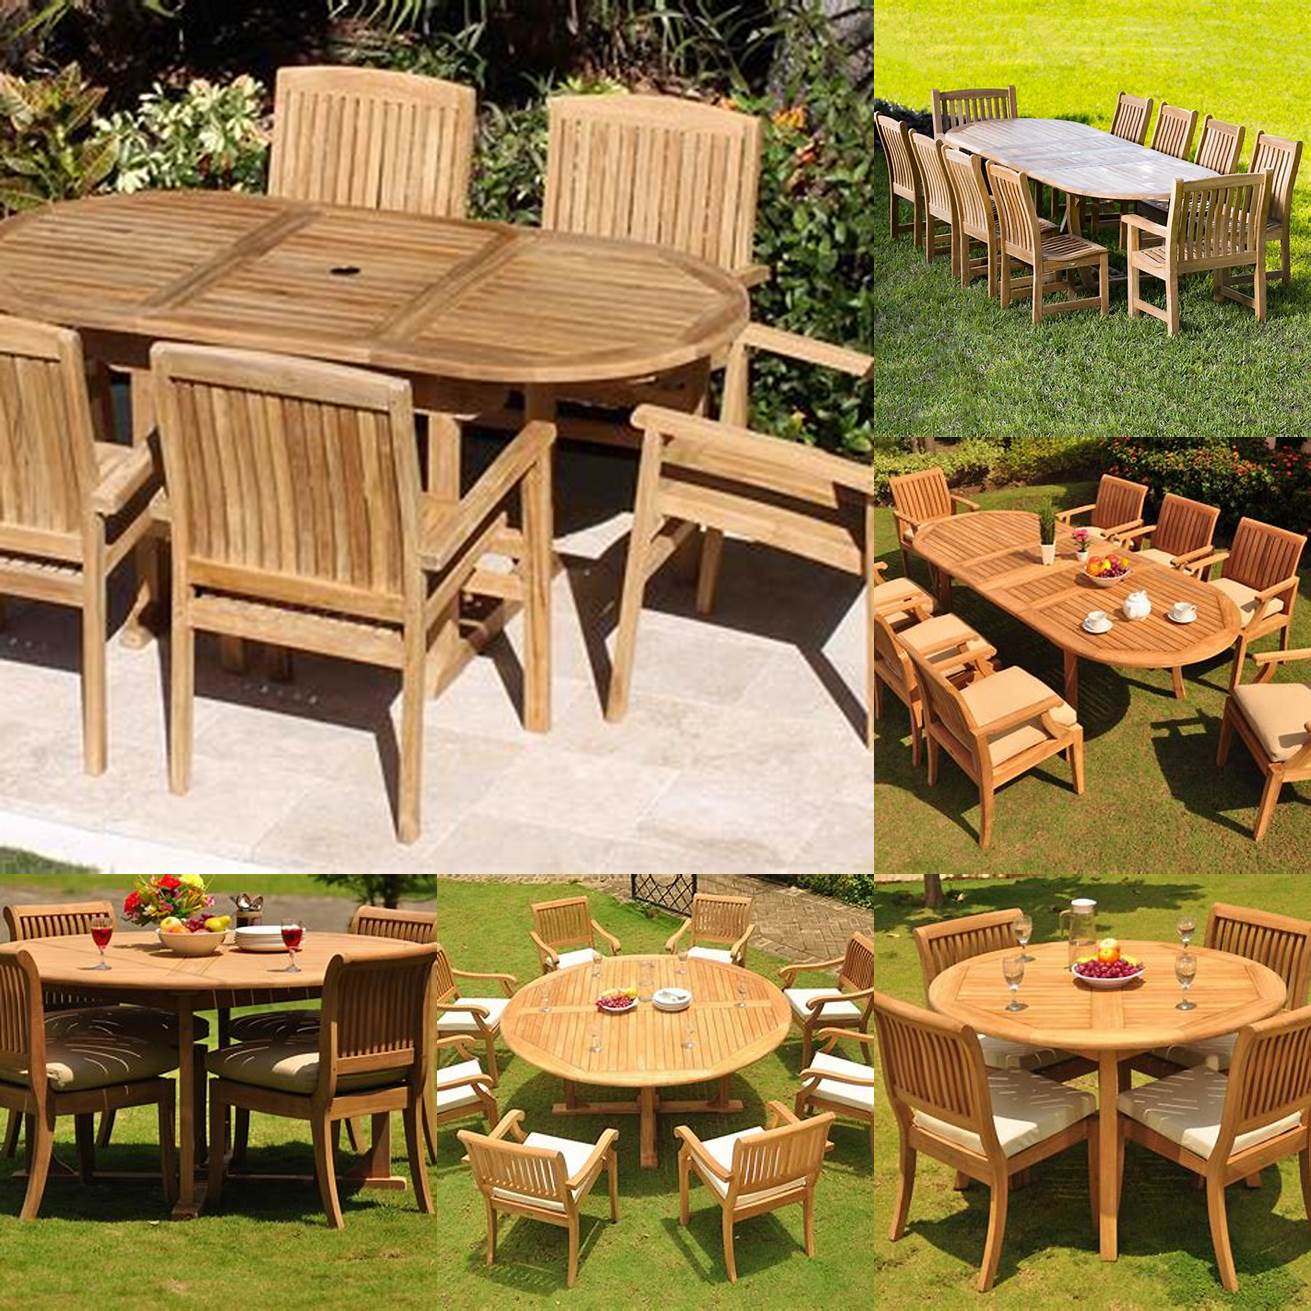 An image of a teak table and chairs with a luxurious finish